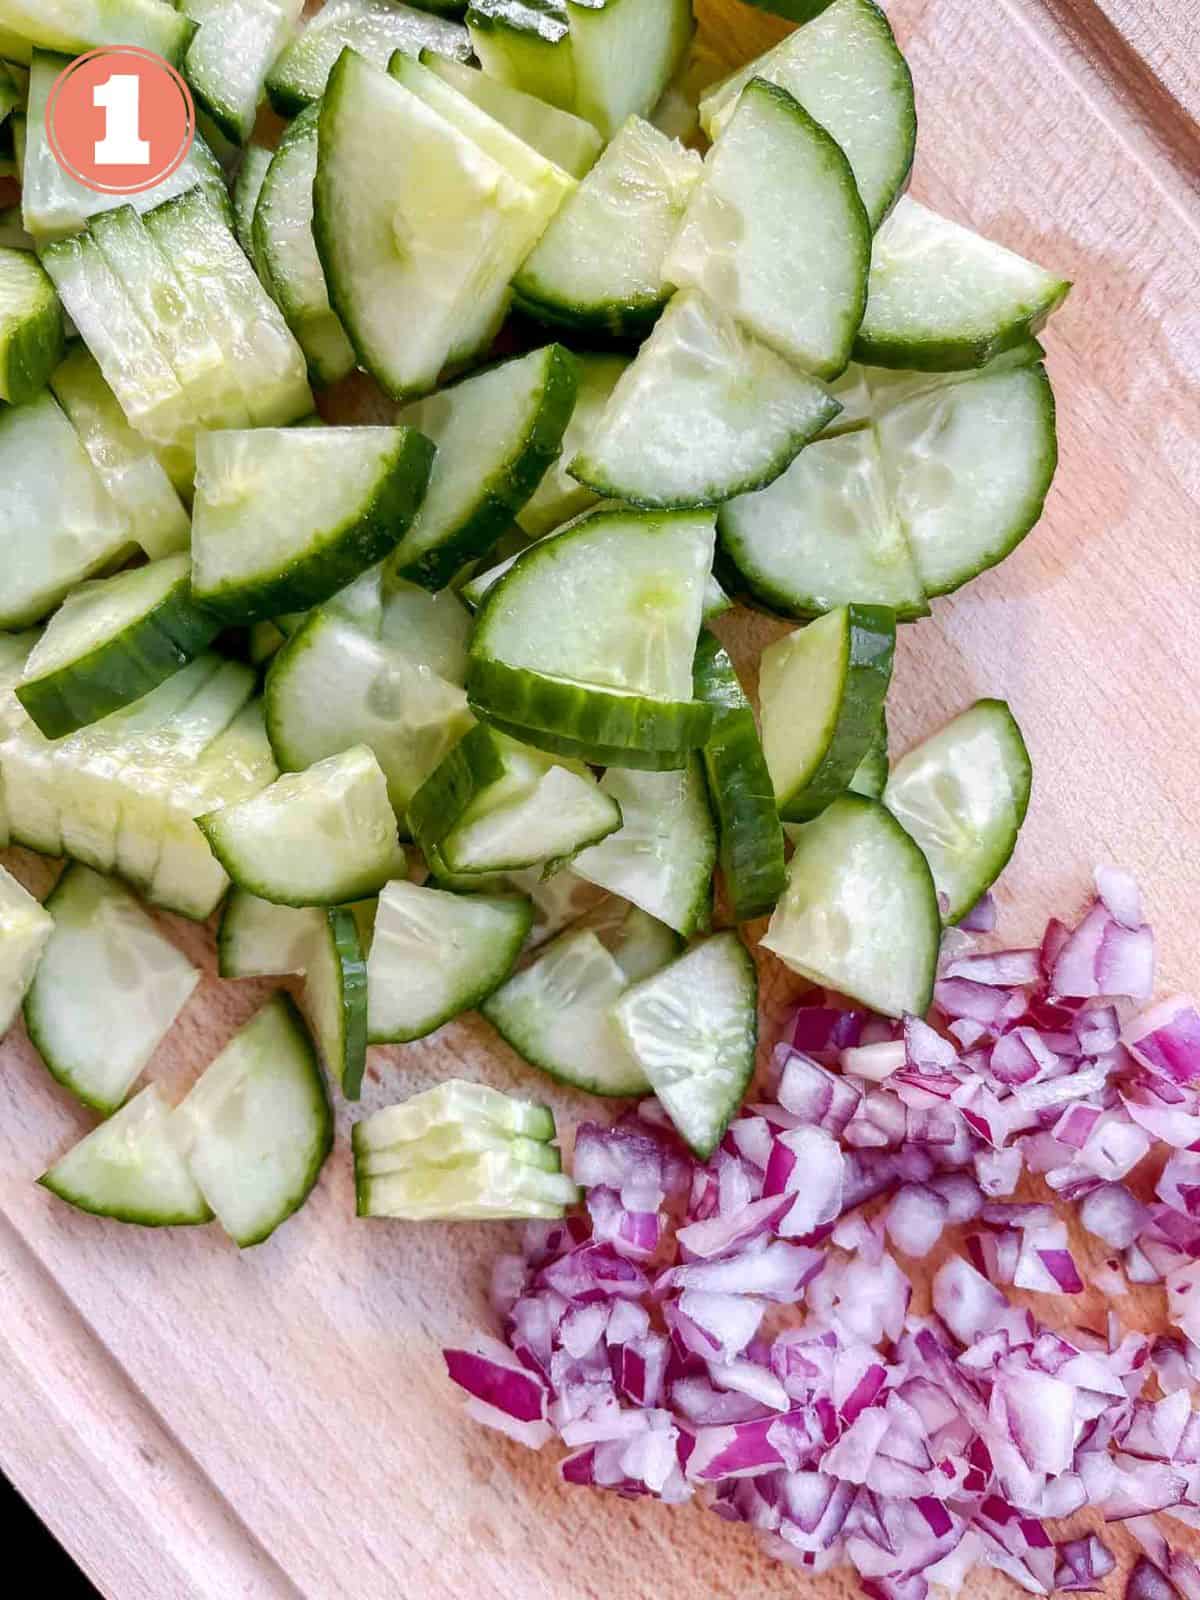 diced English cucumber and red onion on a wooden chopping board labelled number one.